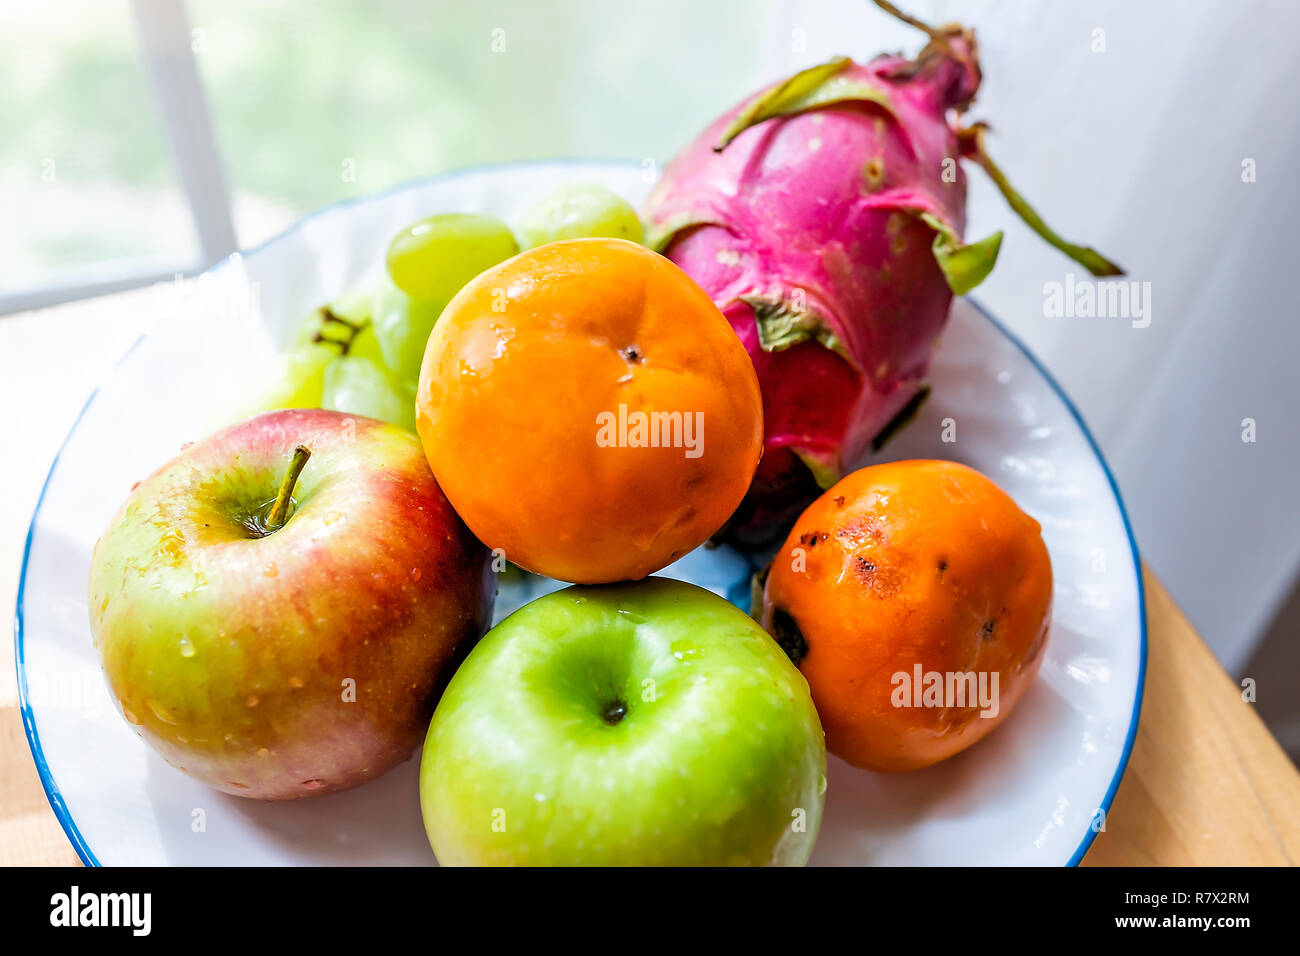 Closeup of whole orange, green, red dragon dragonfruit fruit fruits, apples, persimmons kaki, on plate, wooden table by window, autumn season Stock Photo